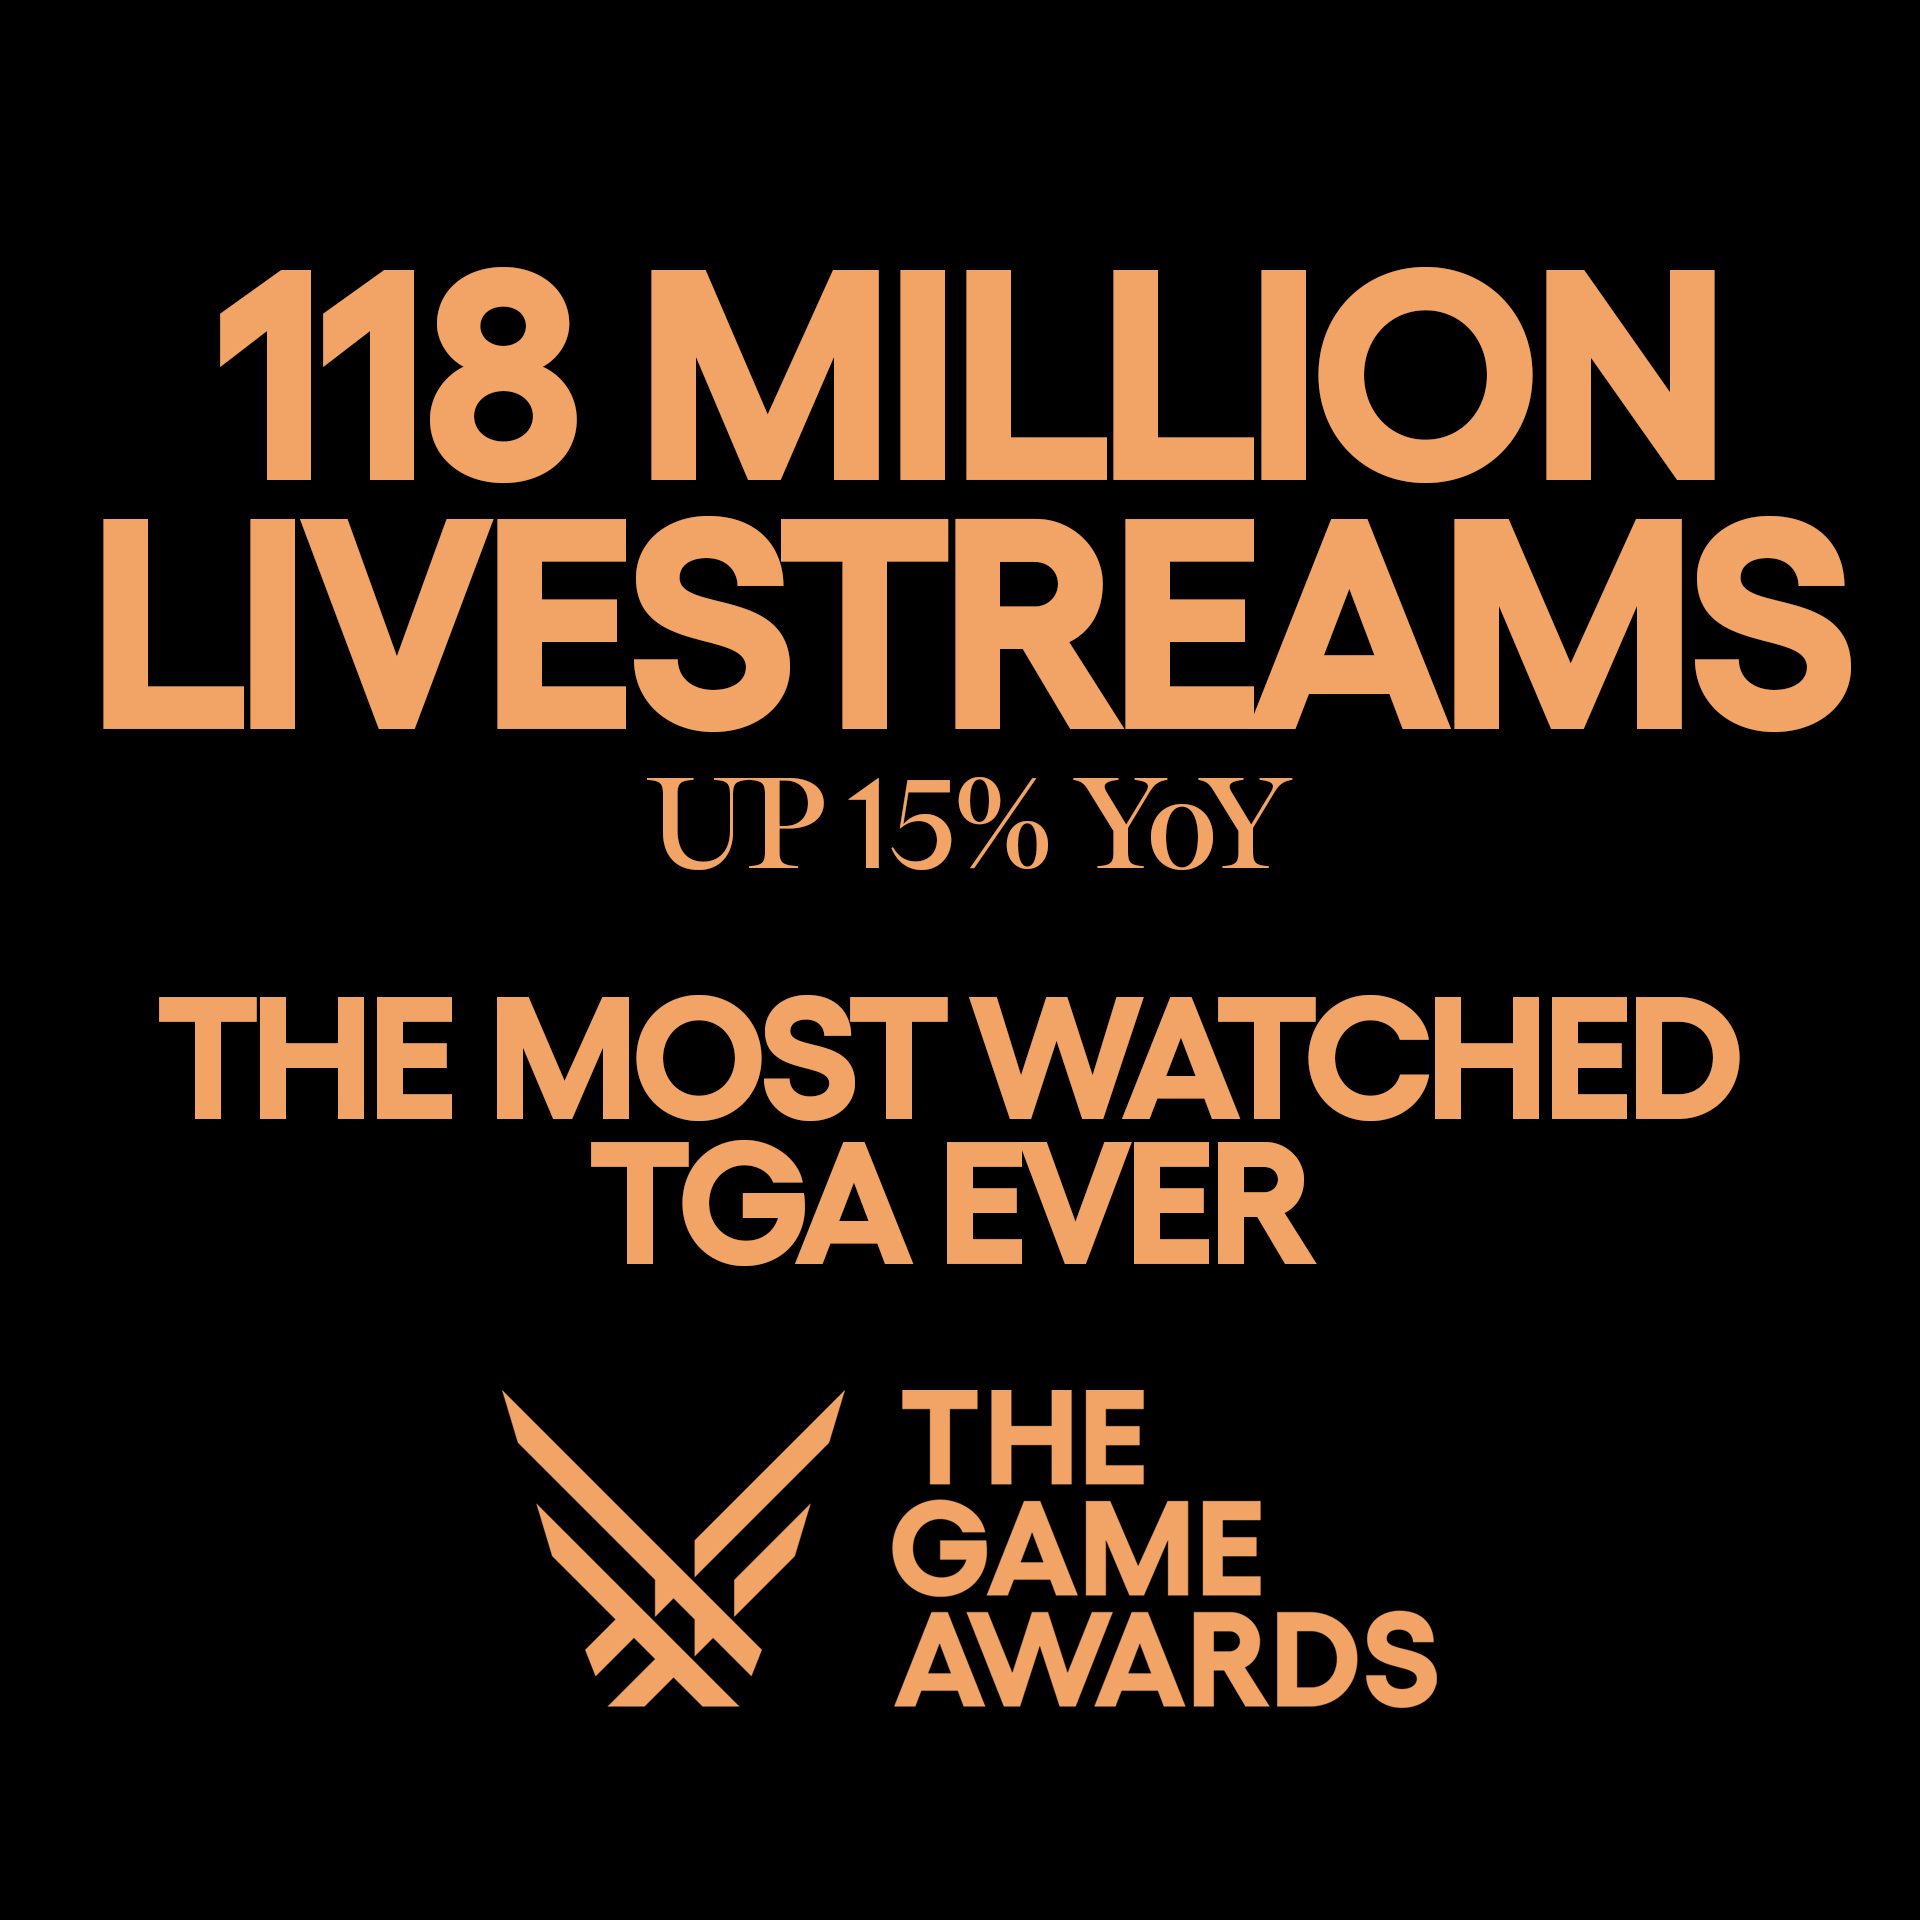 Watch and co-stream The Game Awards on Twitch